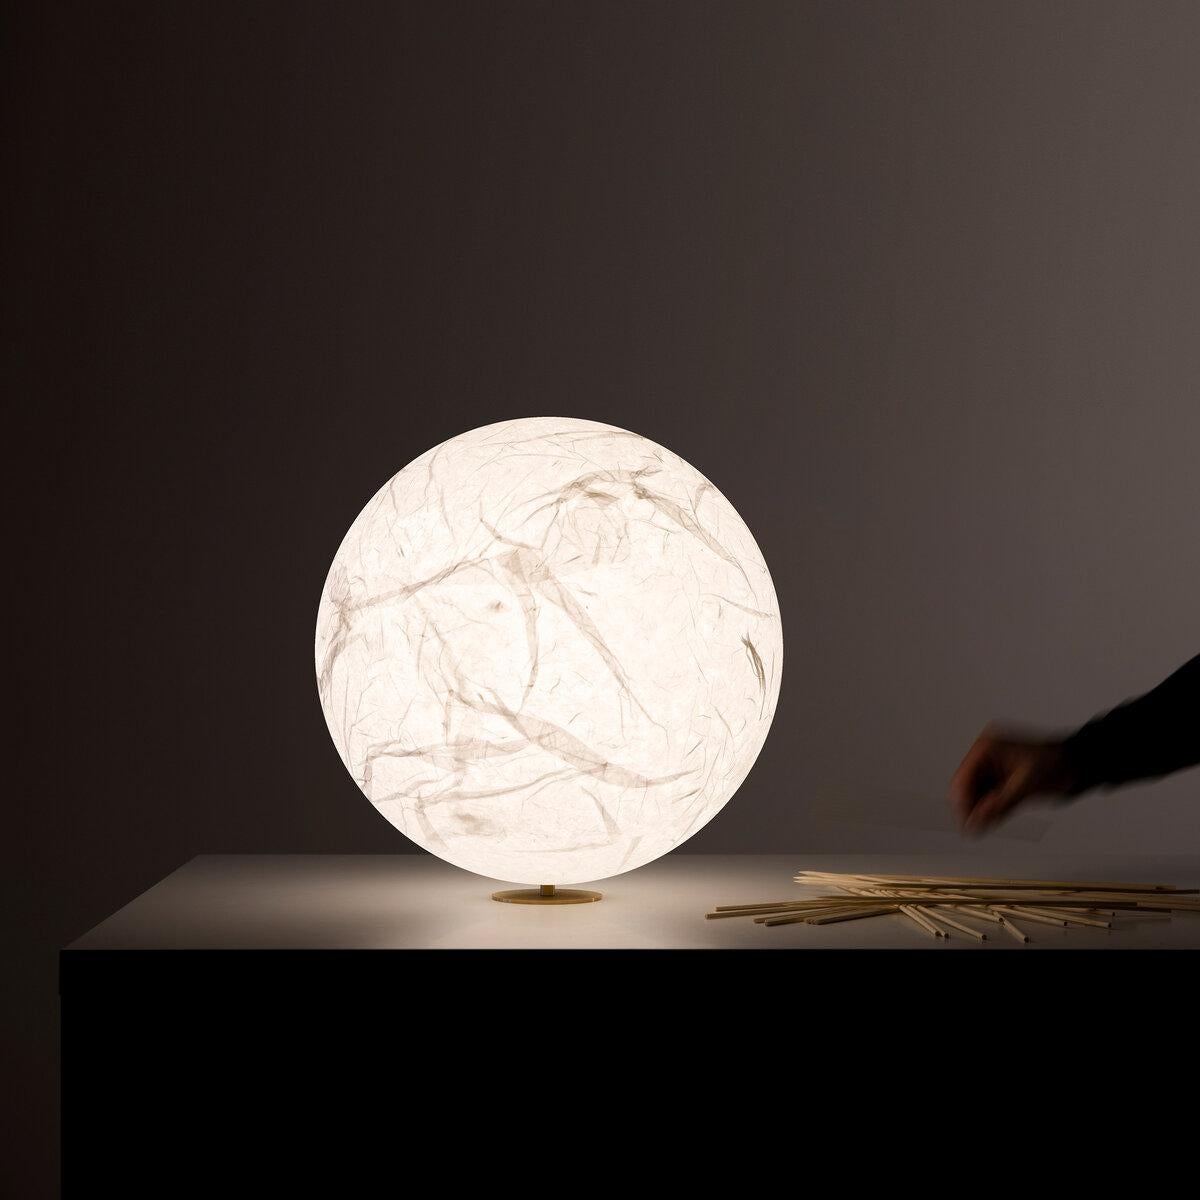 Moon was created from the dream of bringing the moon inside your own home.
The hand-made Japanese paper surface makes every lamp unique.
Suspension and floor versions available

Max 18W - E26
120V - 60Hz
Bulb not included
Dimmer on